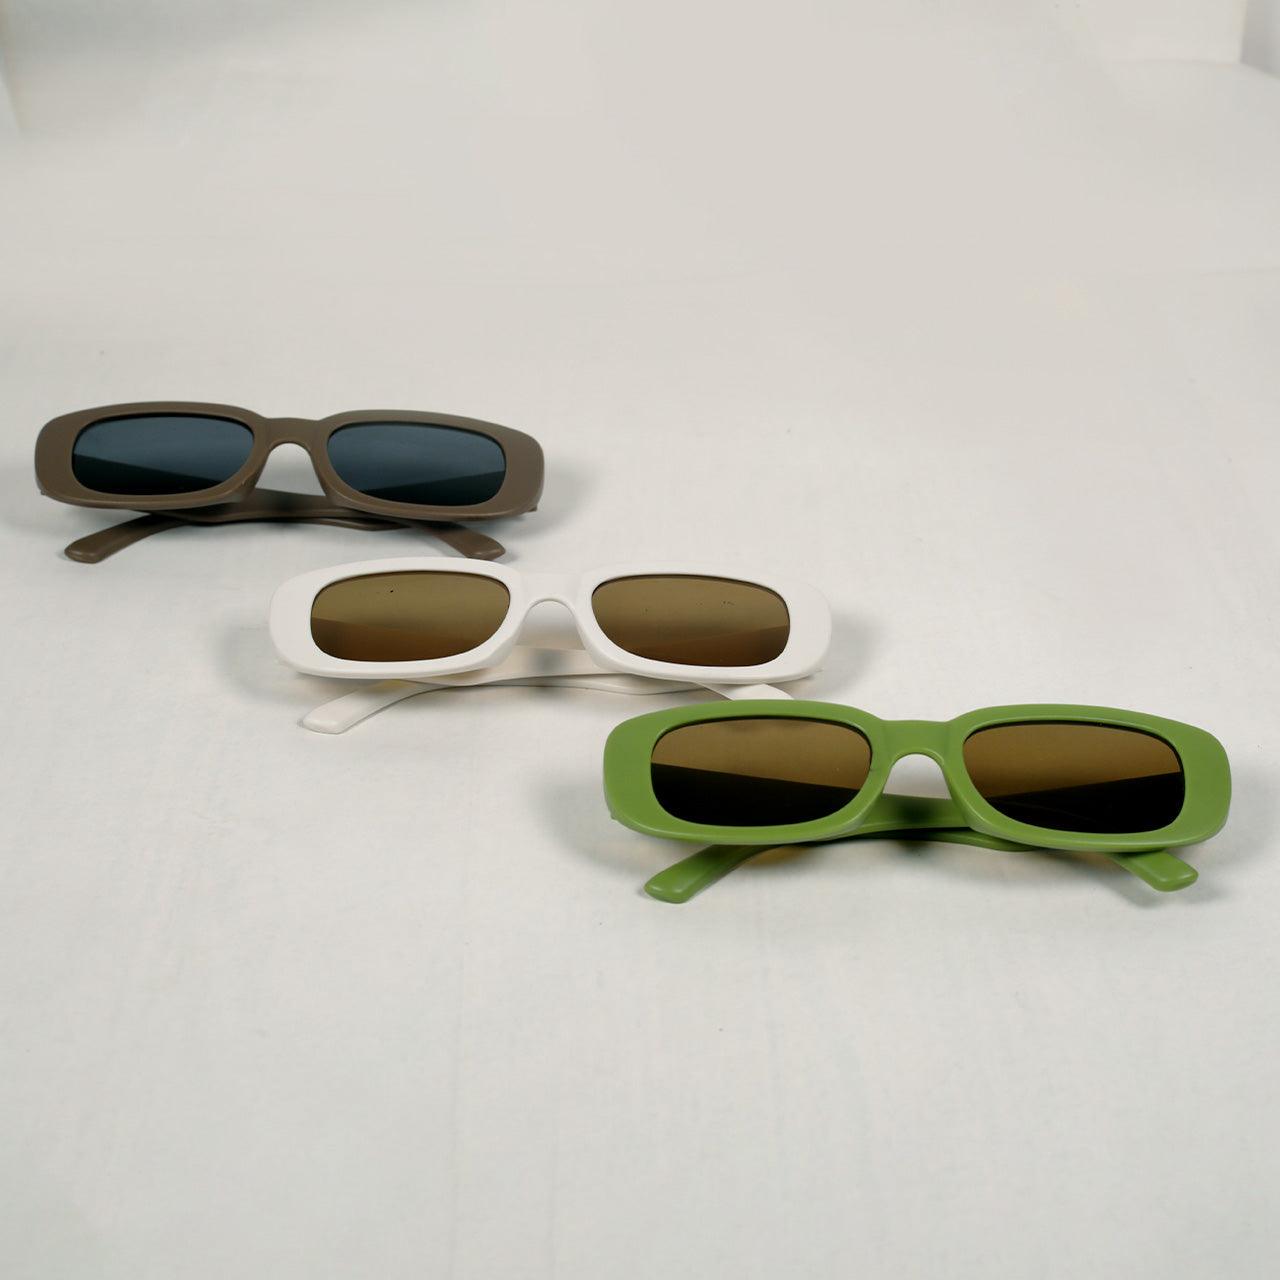 Offwhite Rounded Rectangle Sunglasses